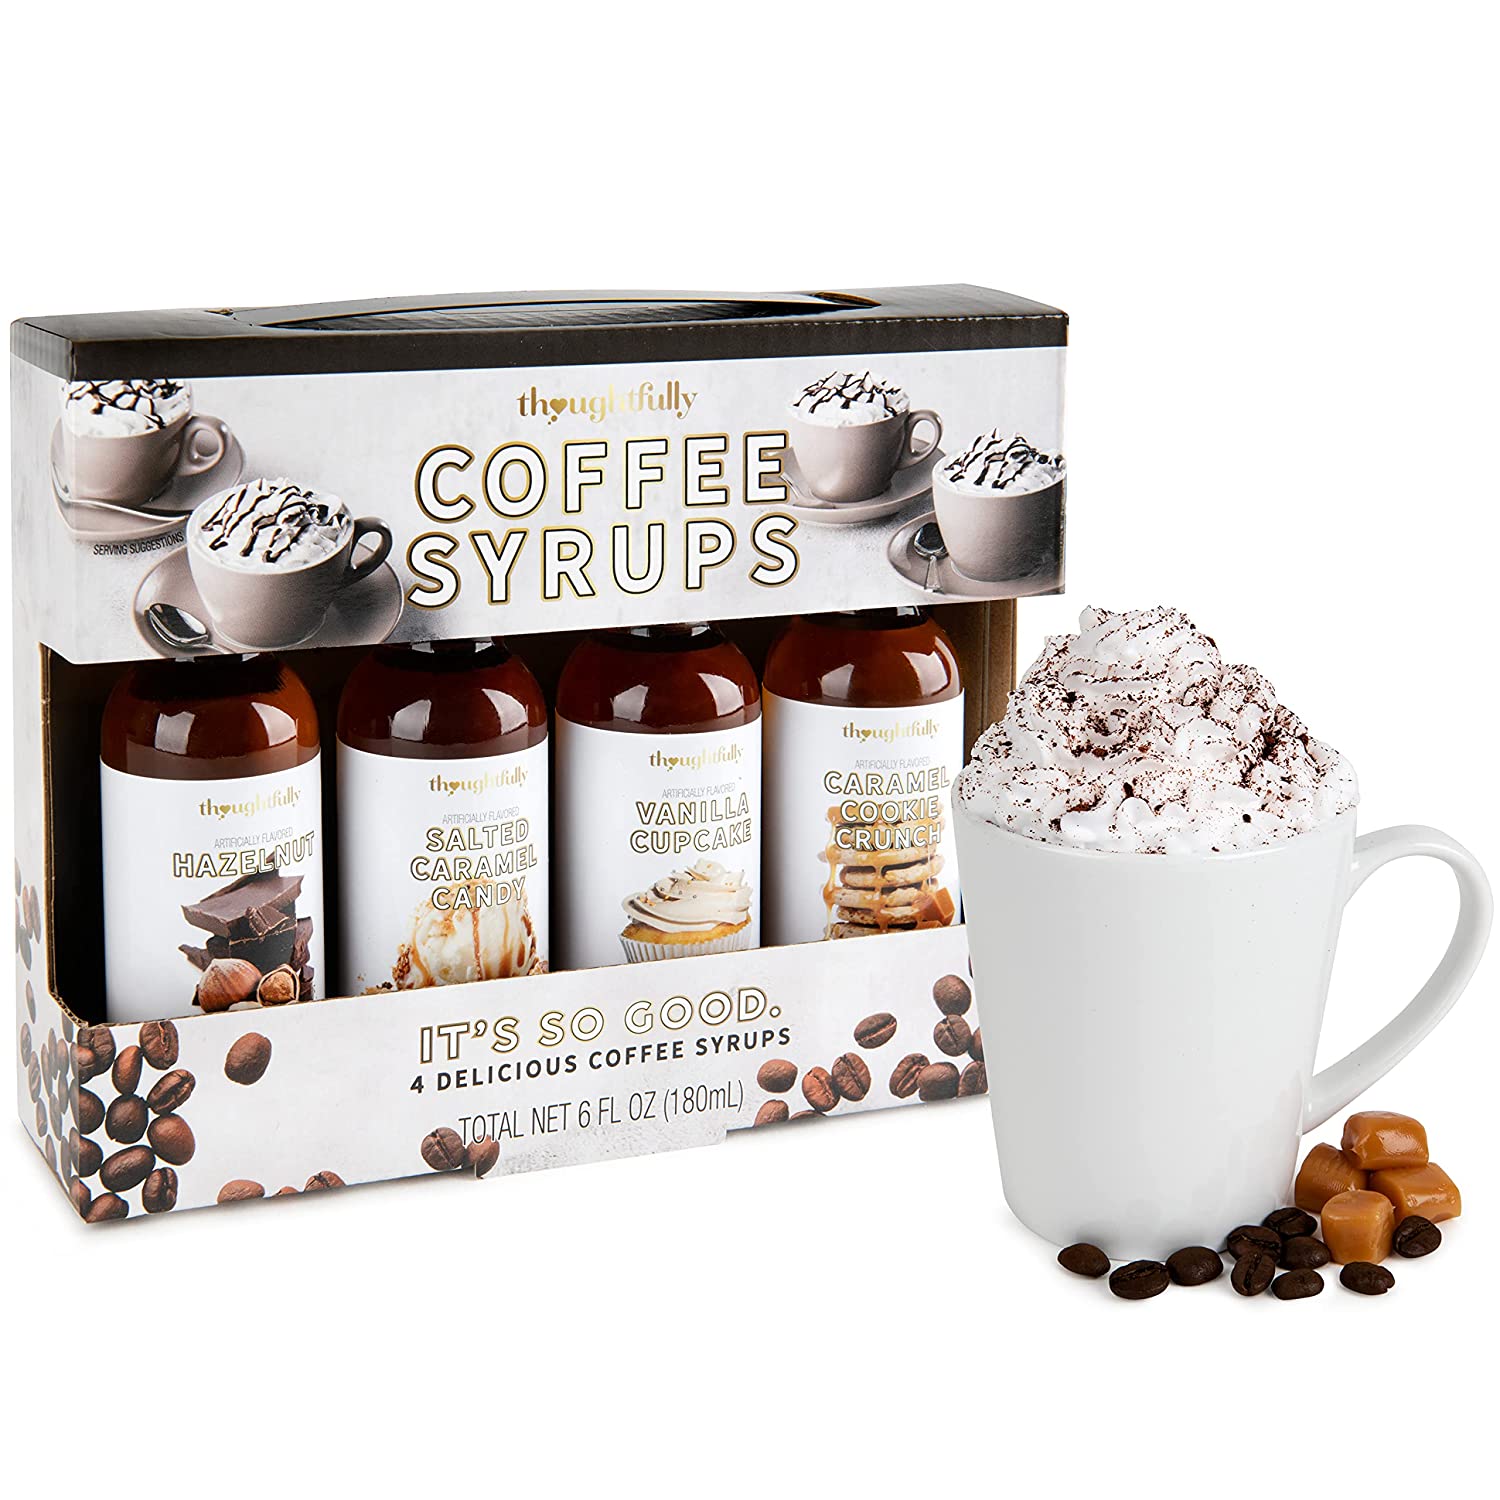 inexpensive-xmas-gifts-coffee-syrups